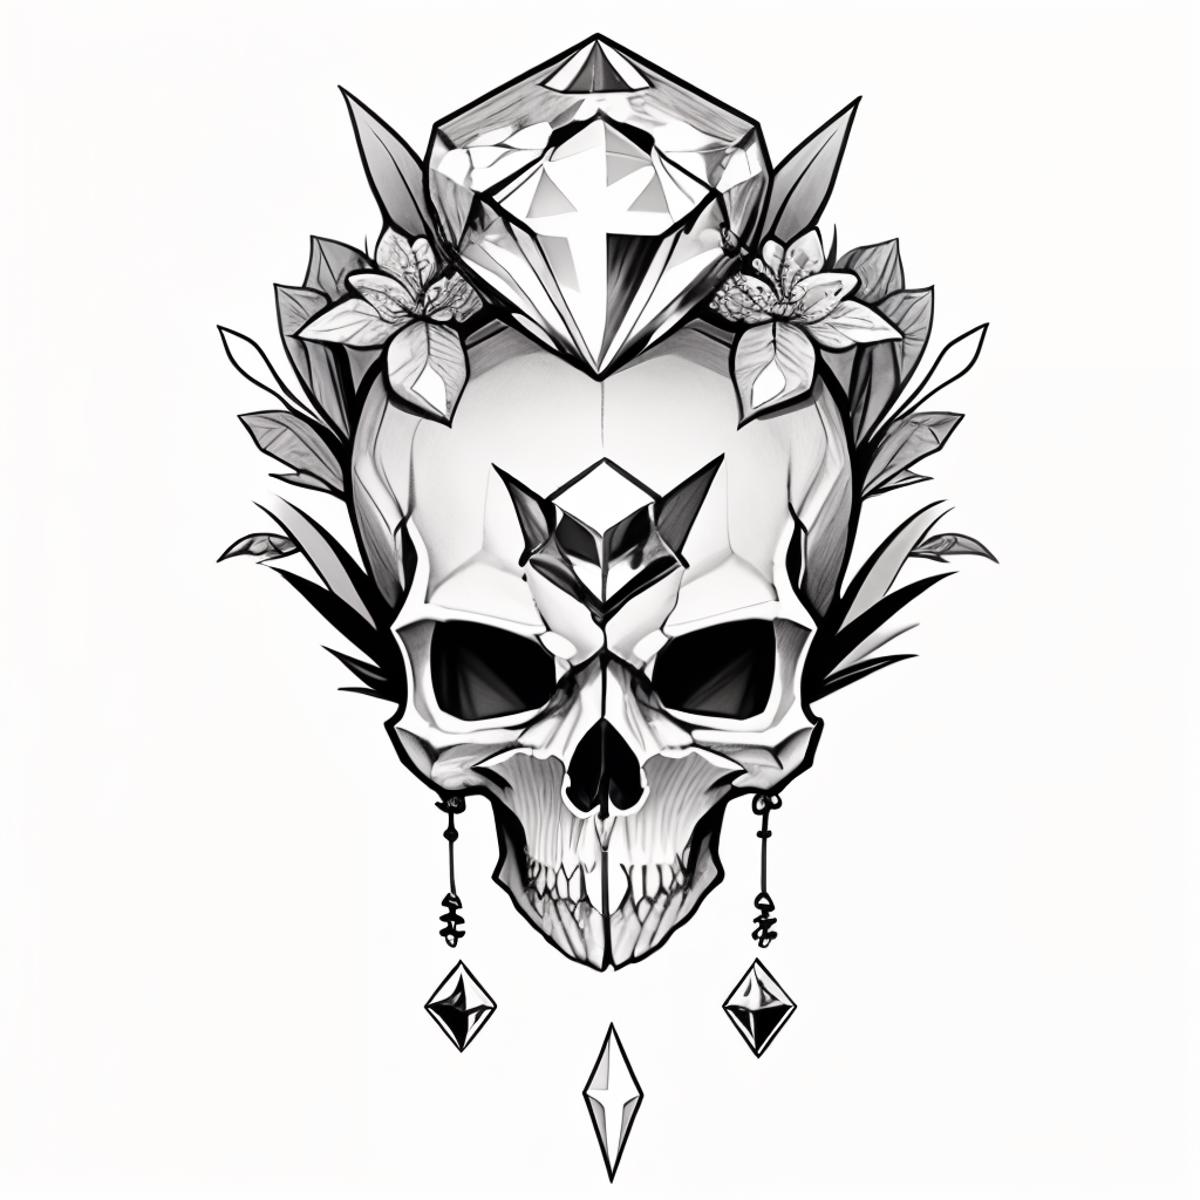 Minimalist tattoo designs (SD1.5 & NAI available) image by Pastorale